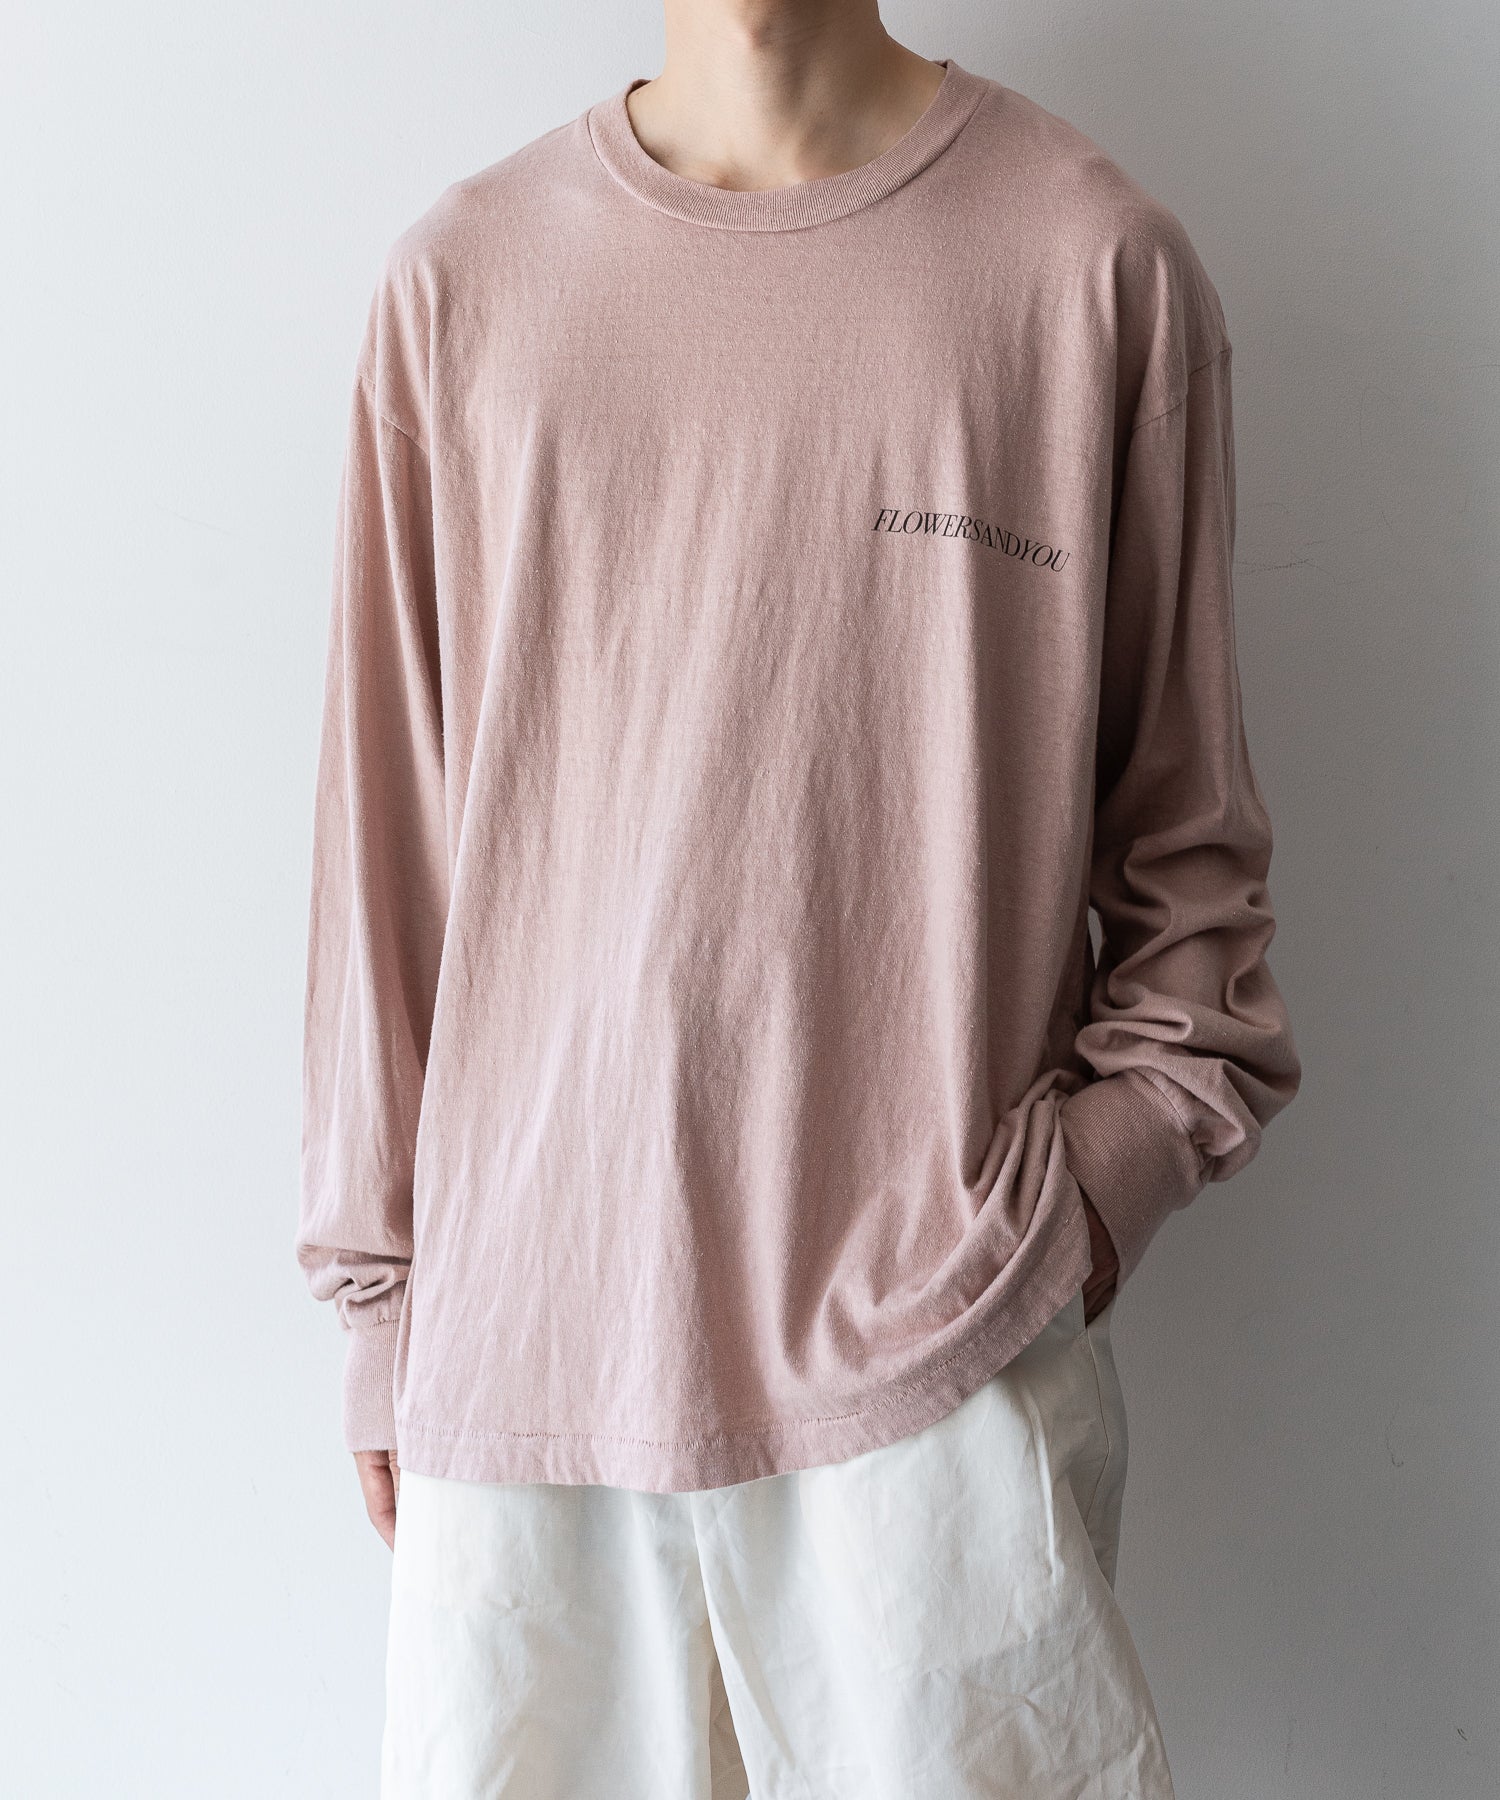 Overdyed L/S Top